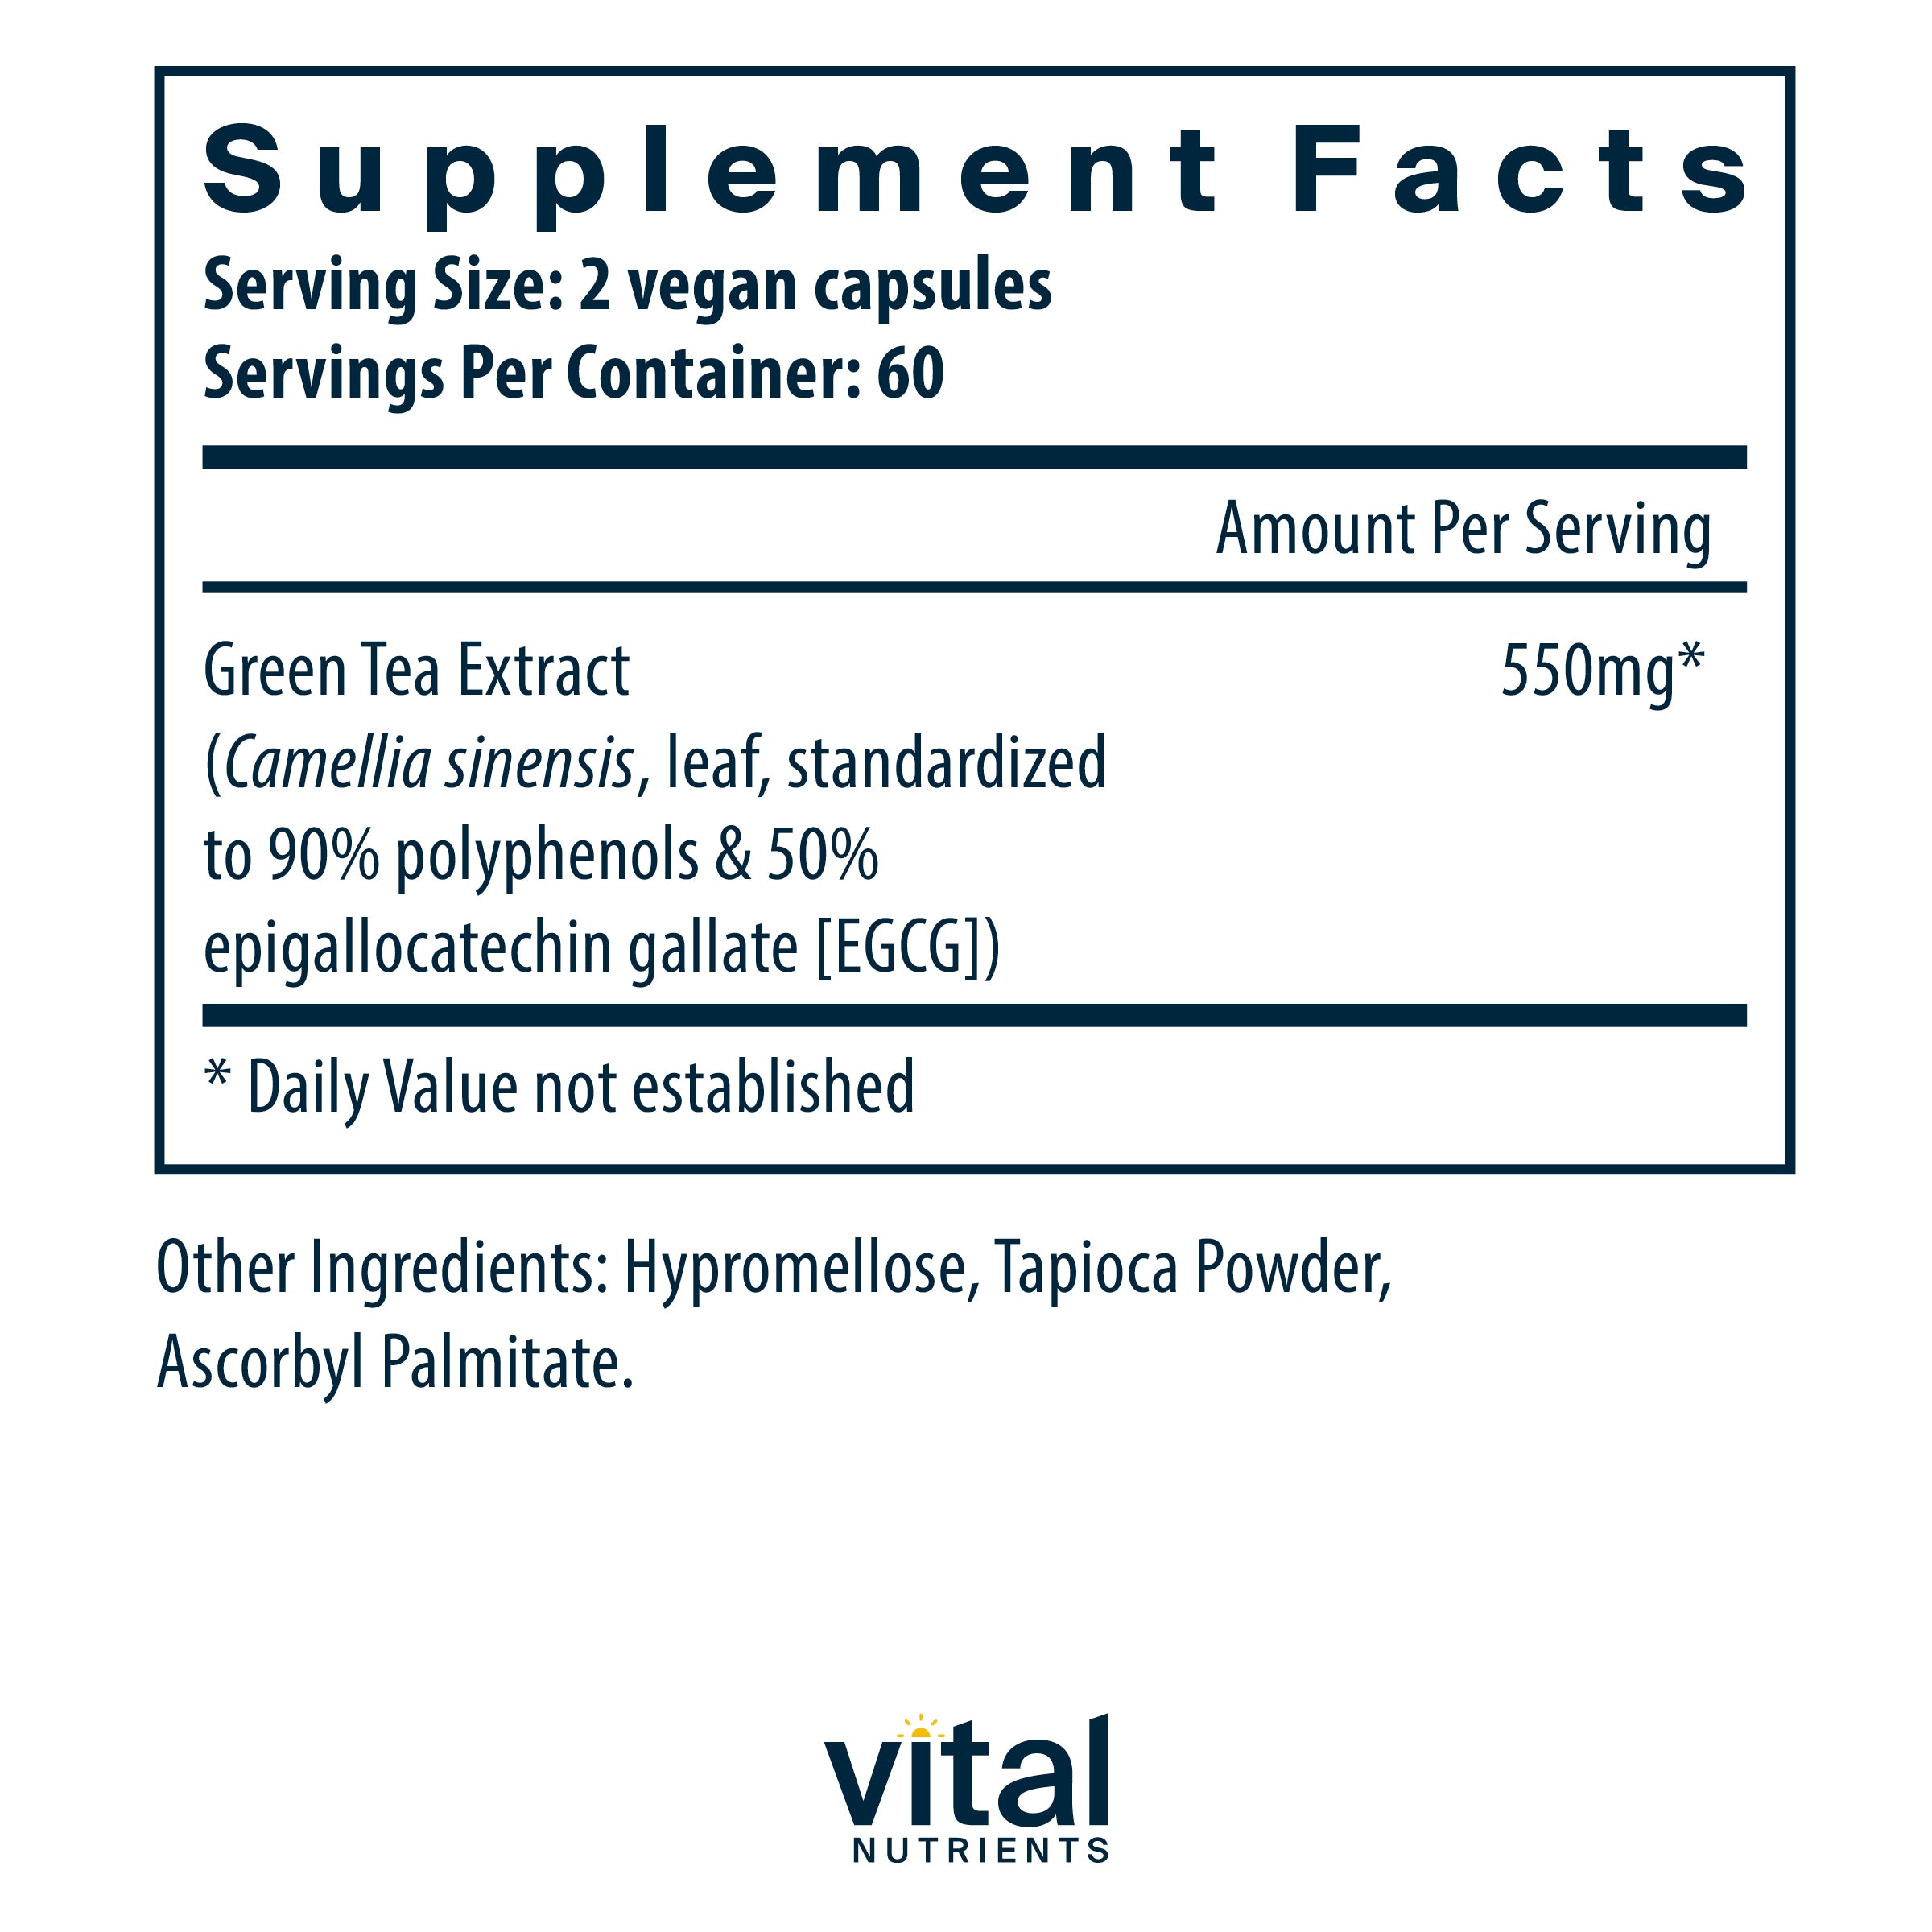 Vital Nutrients Green Tea Extract Supplement Facts